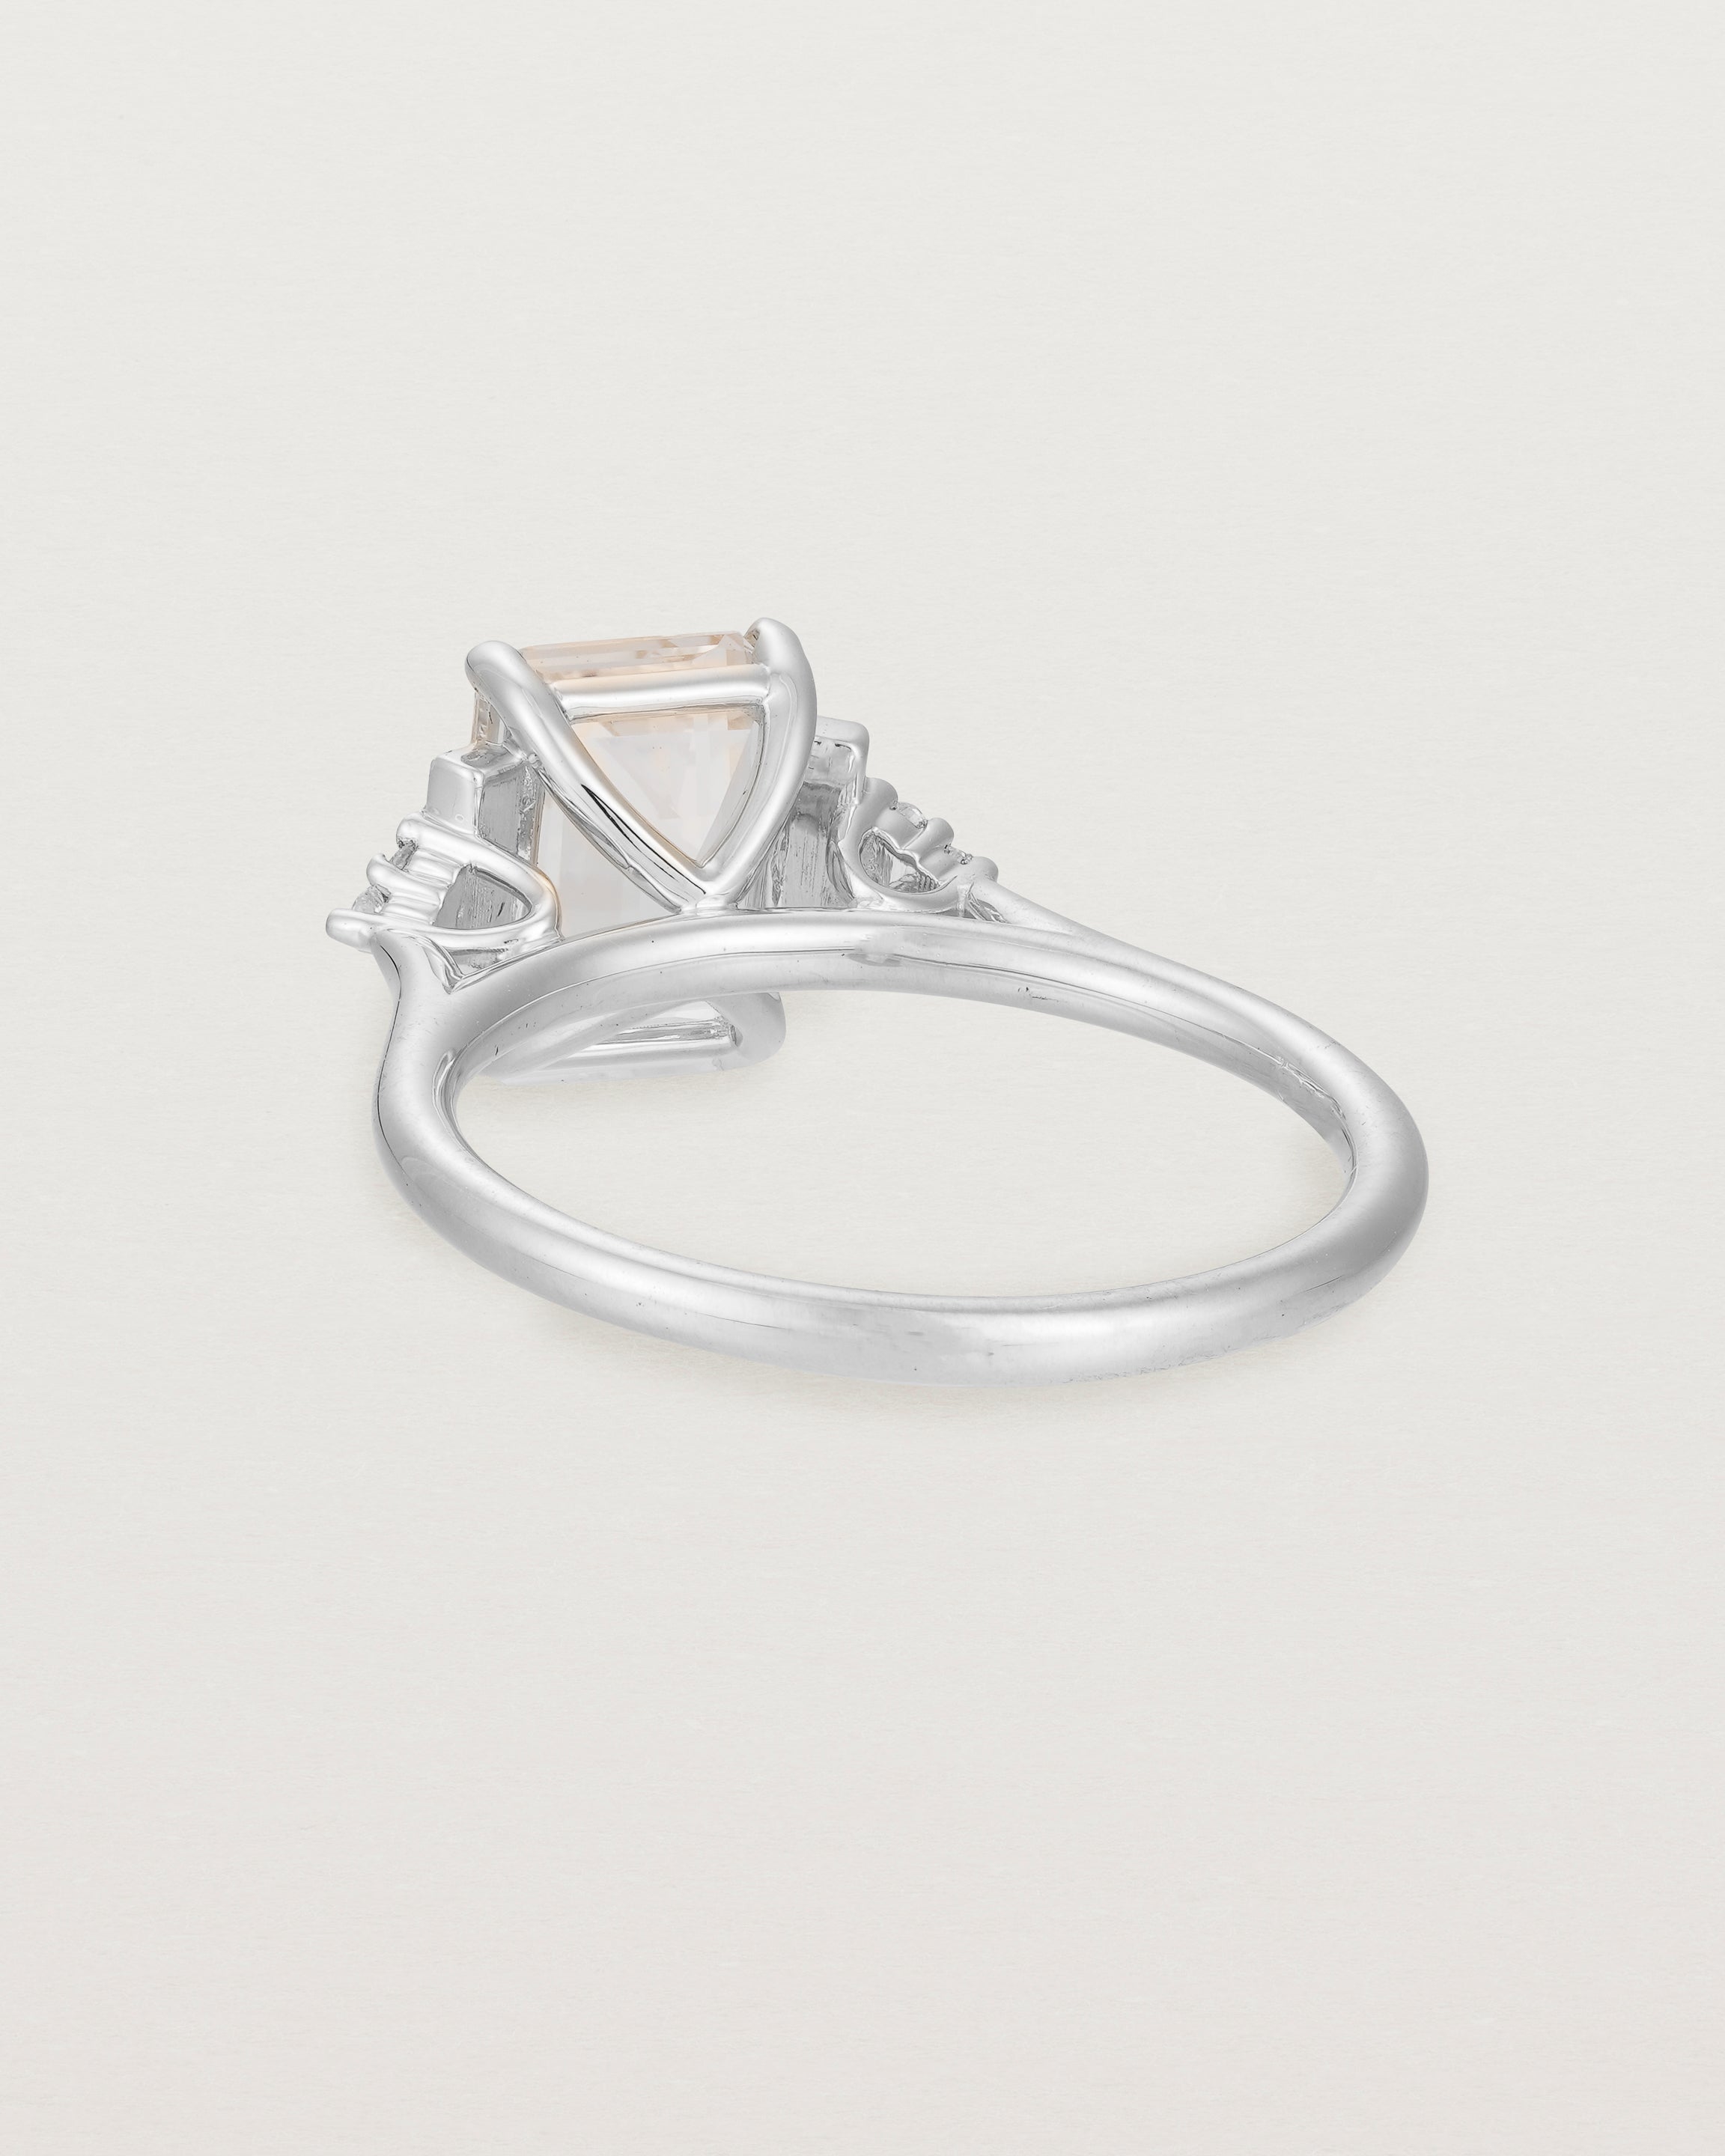 Back view of the Elodie Ring featuring a pale pink emerald cut morganite in white gold